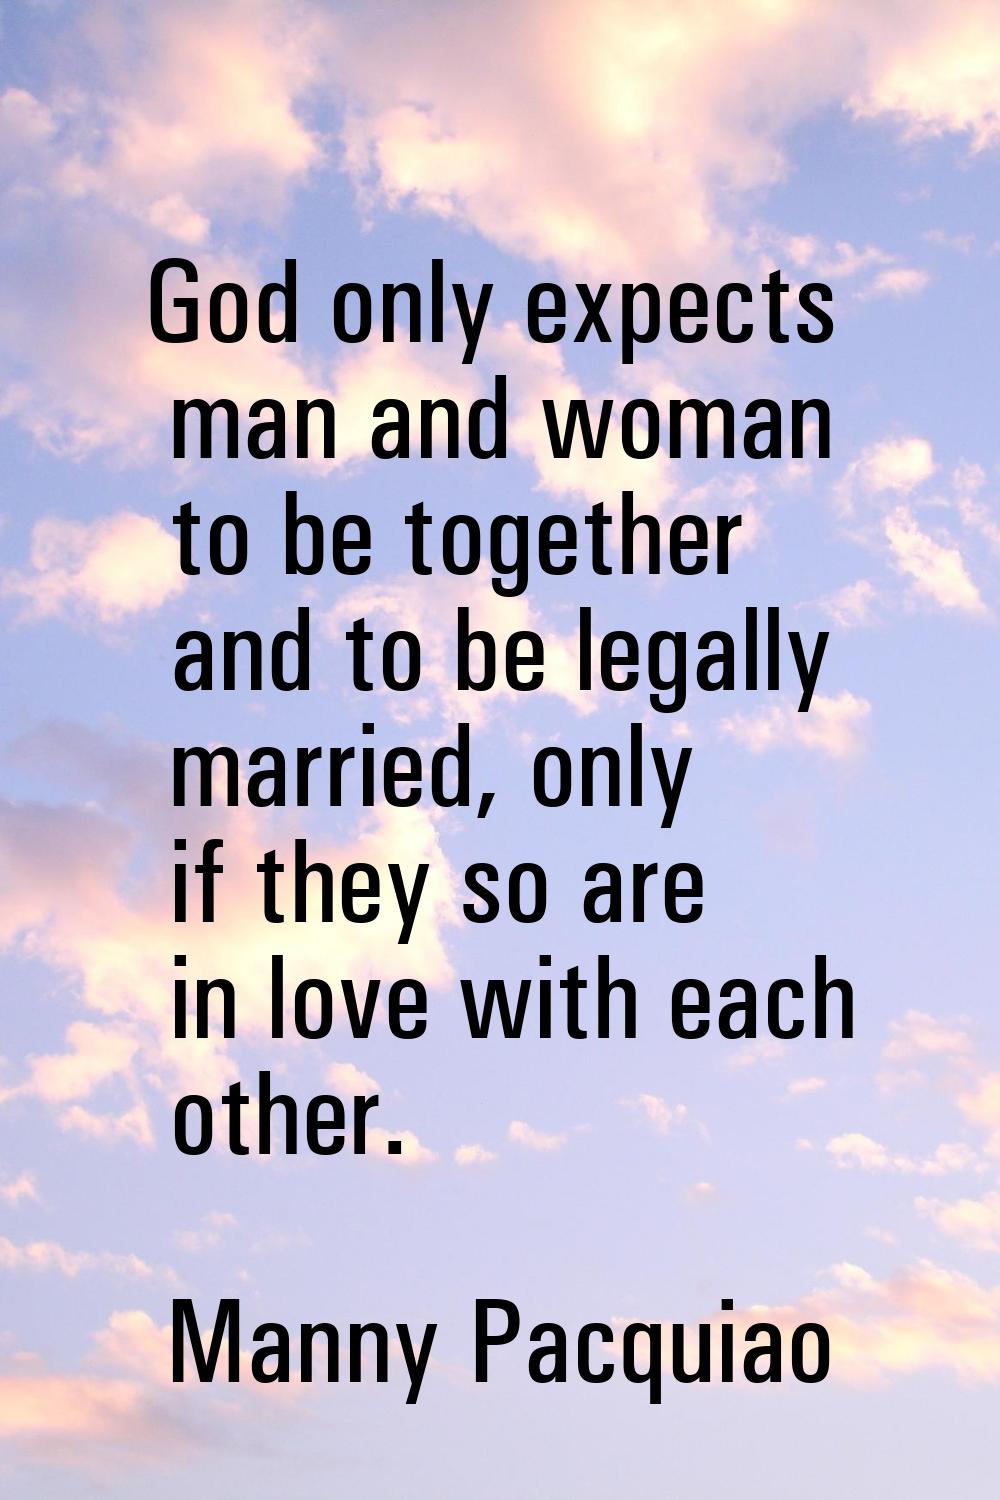 God only expects man and woman to be together and to be legally married, only if they so are in lov